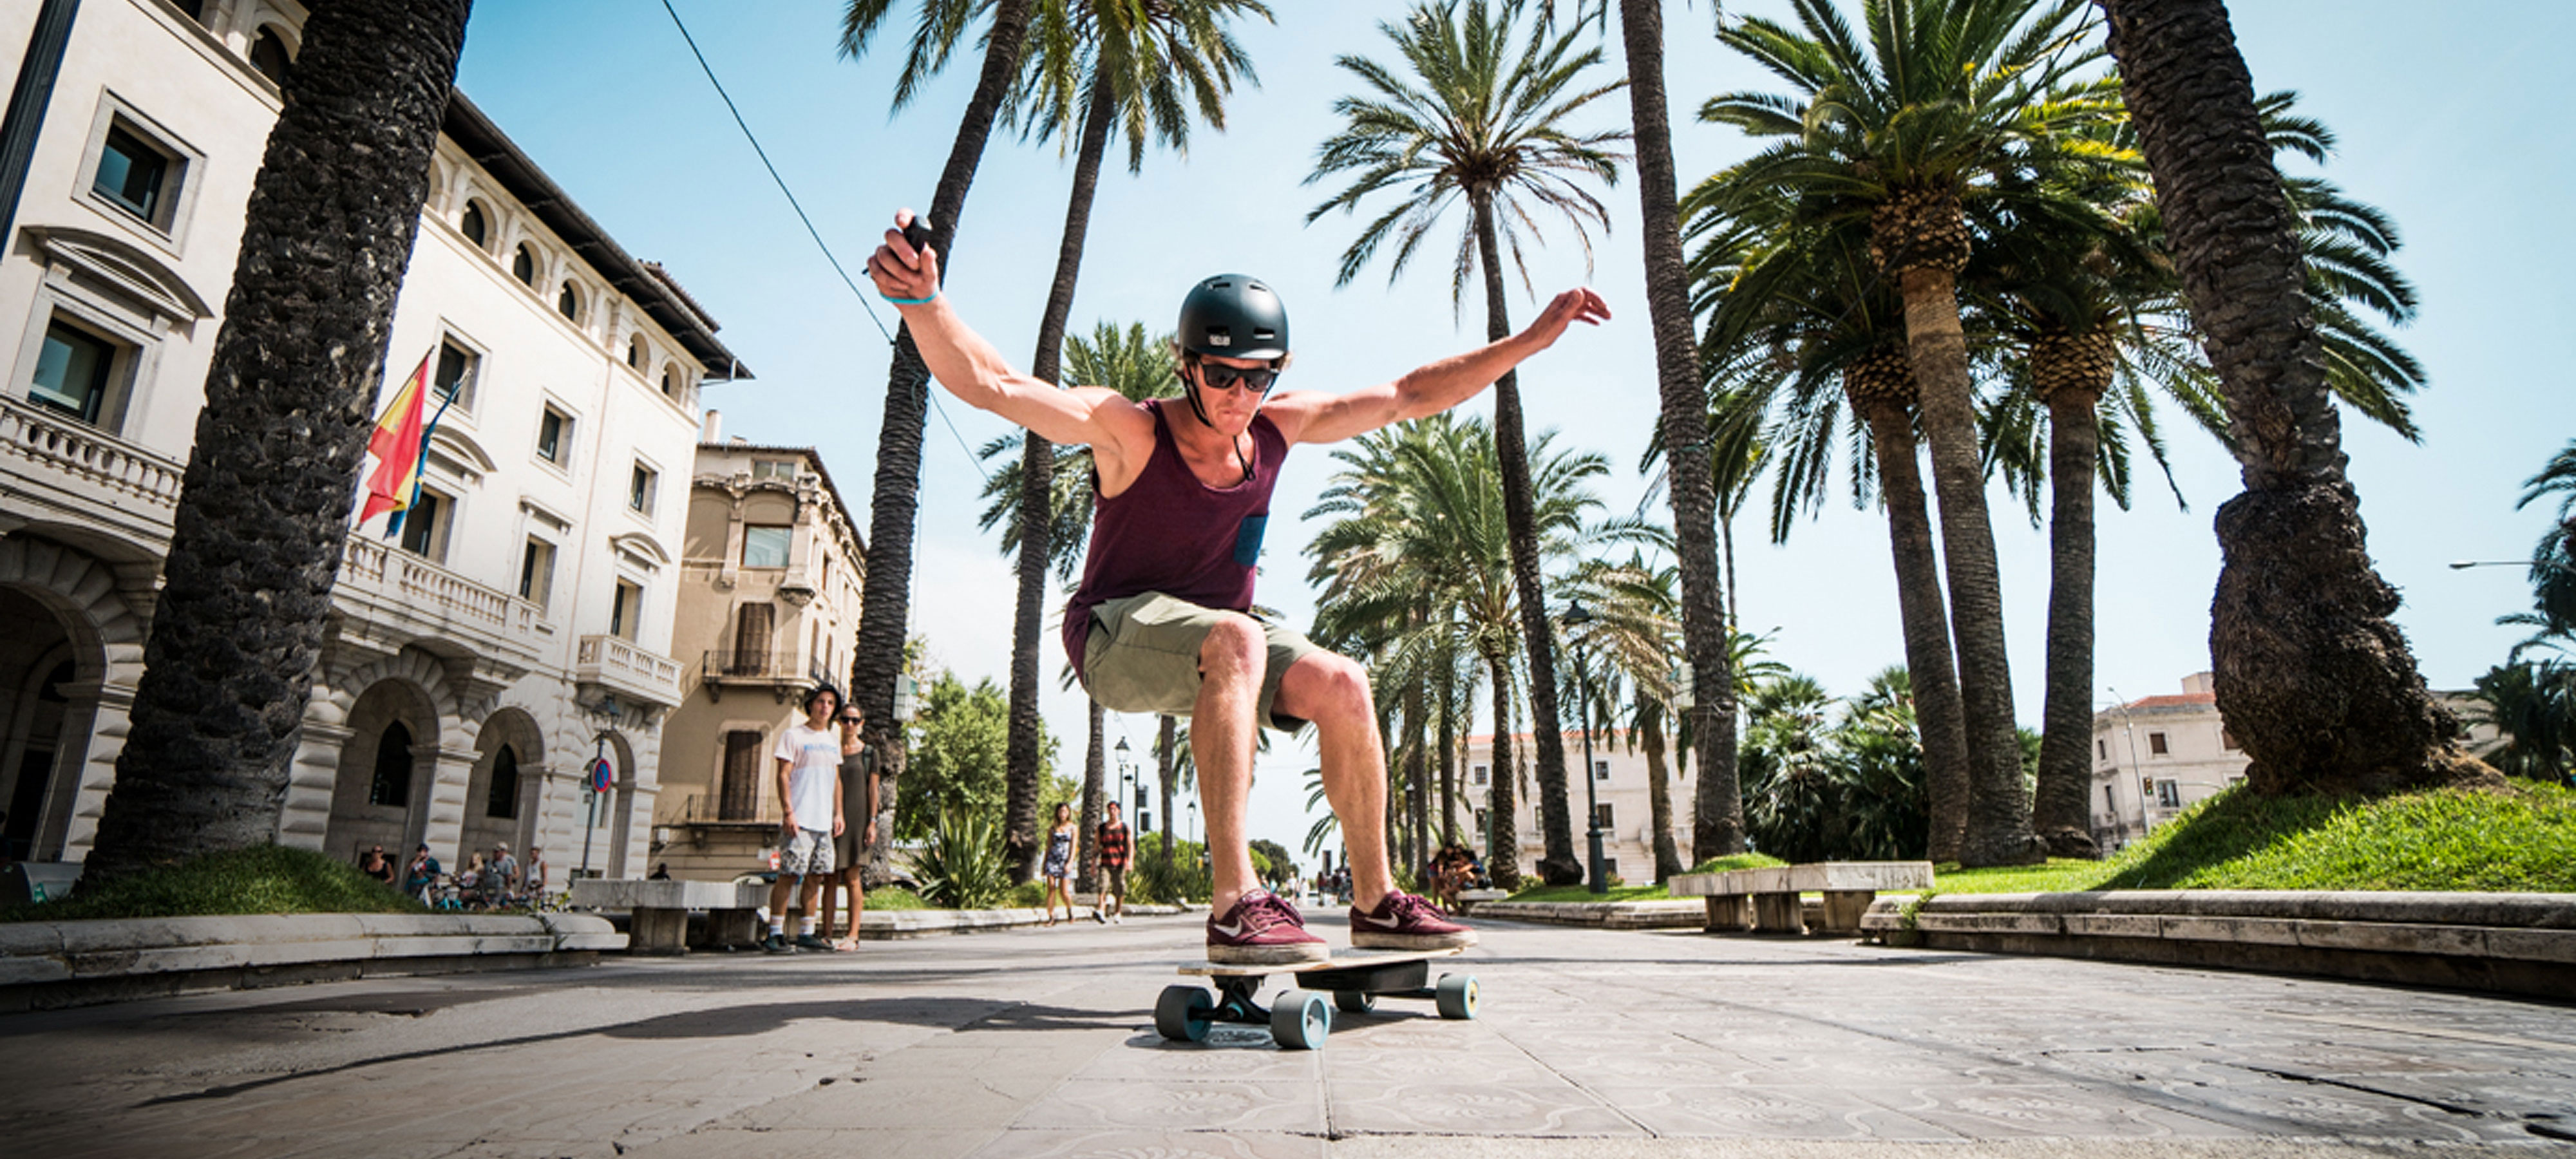 The Electric Skateboard Drive that fits under any Skateboard